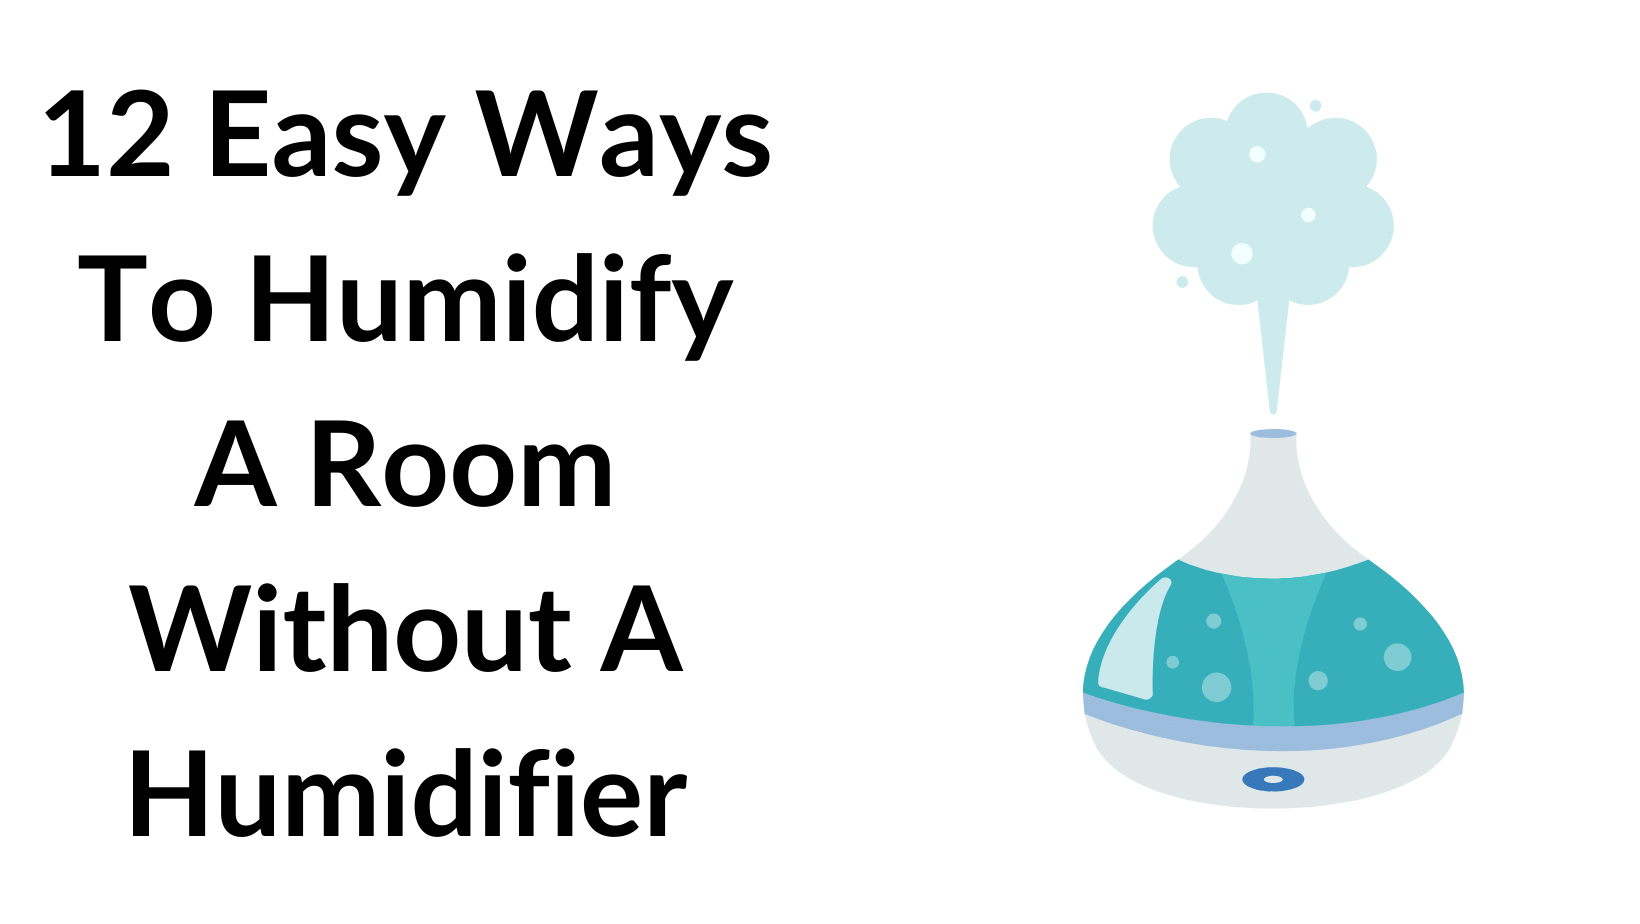 12 Easy Ways To Humidify A Room Without A Humidifier